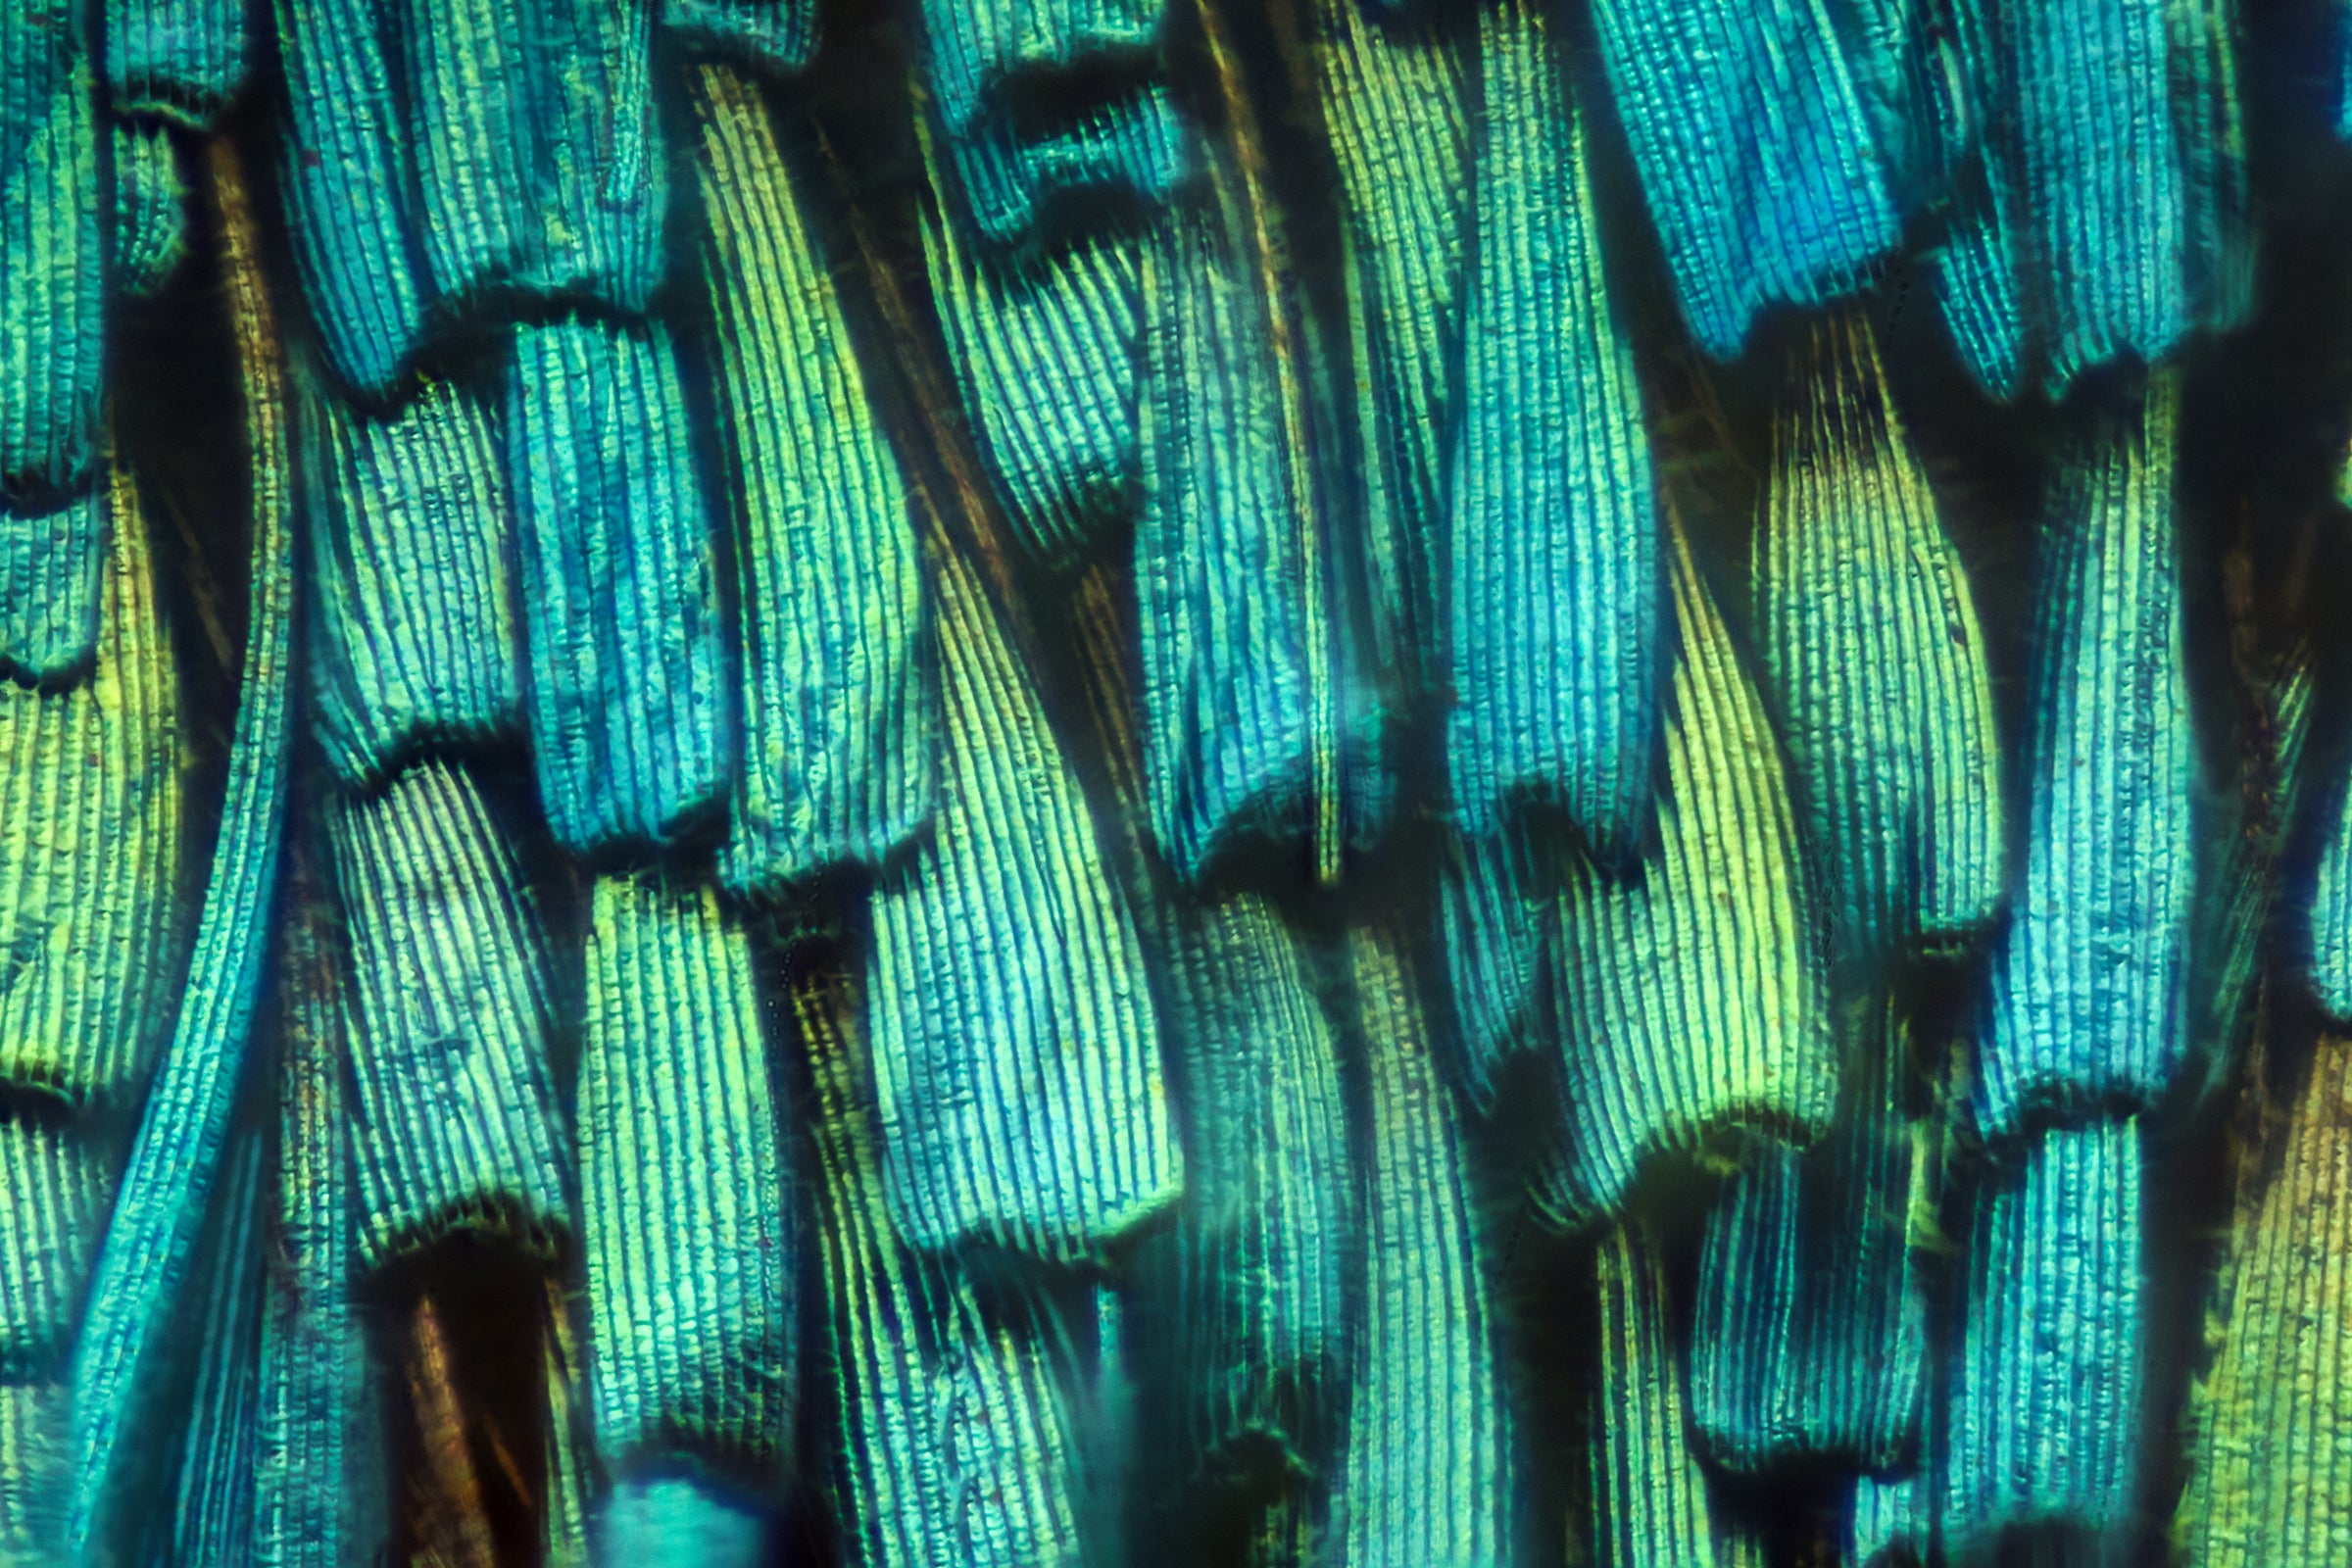 Green and blue moth scales.